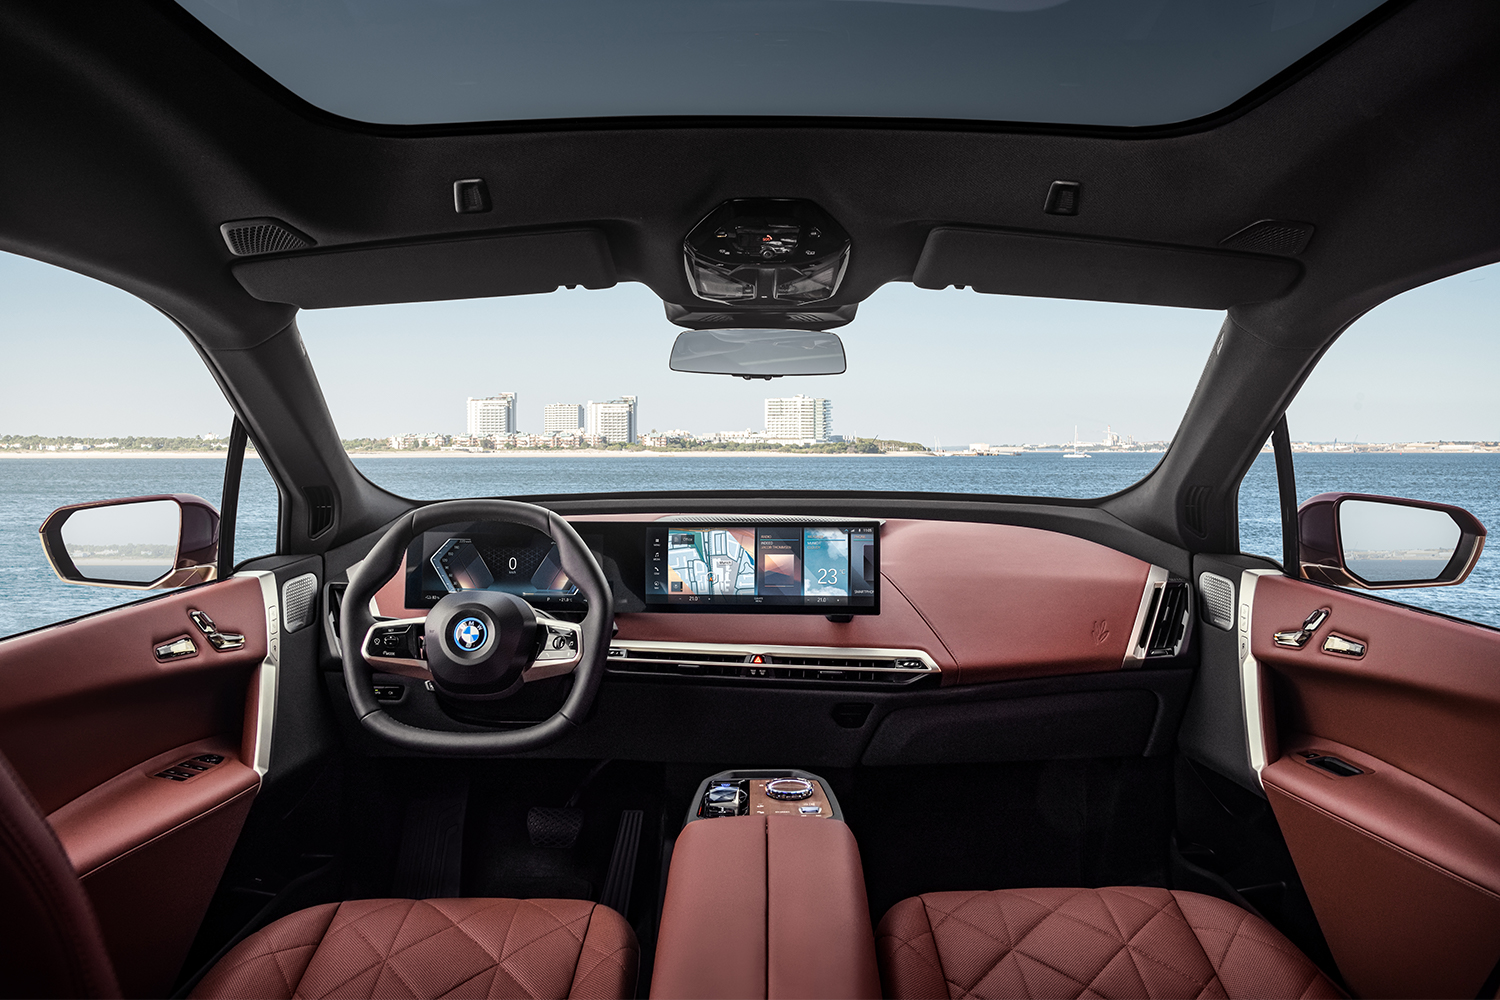 The dashboard of the new BMW iX xDrive50 electric SUV